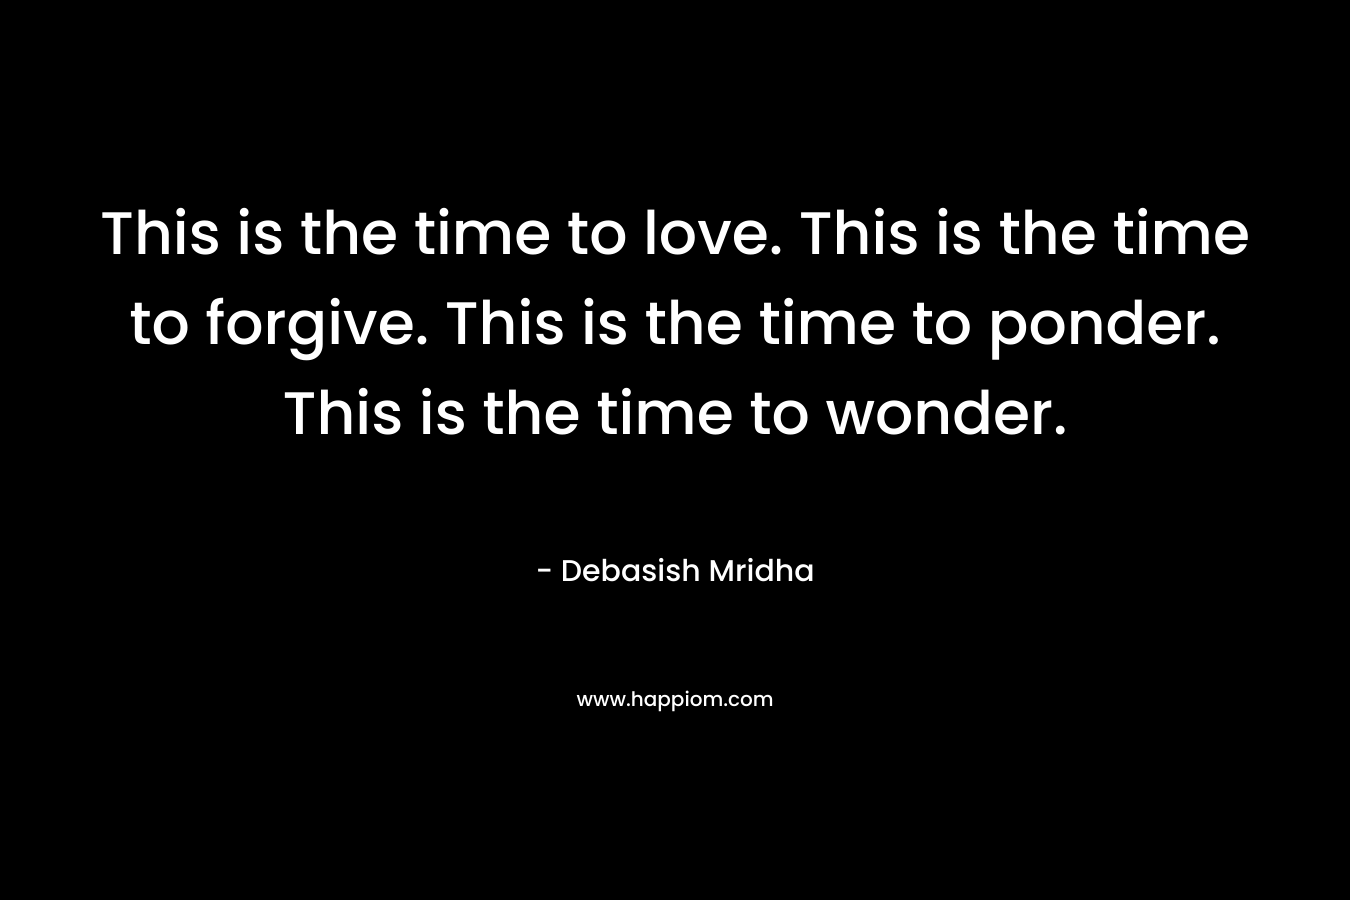 This is the time to love. This is the time to forgive. This is the time to ponder. This is the time to wonder.